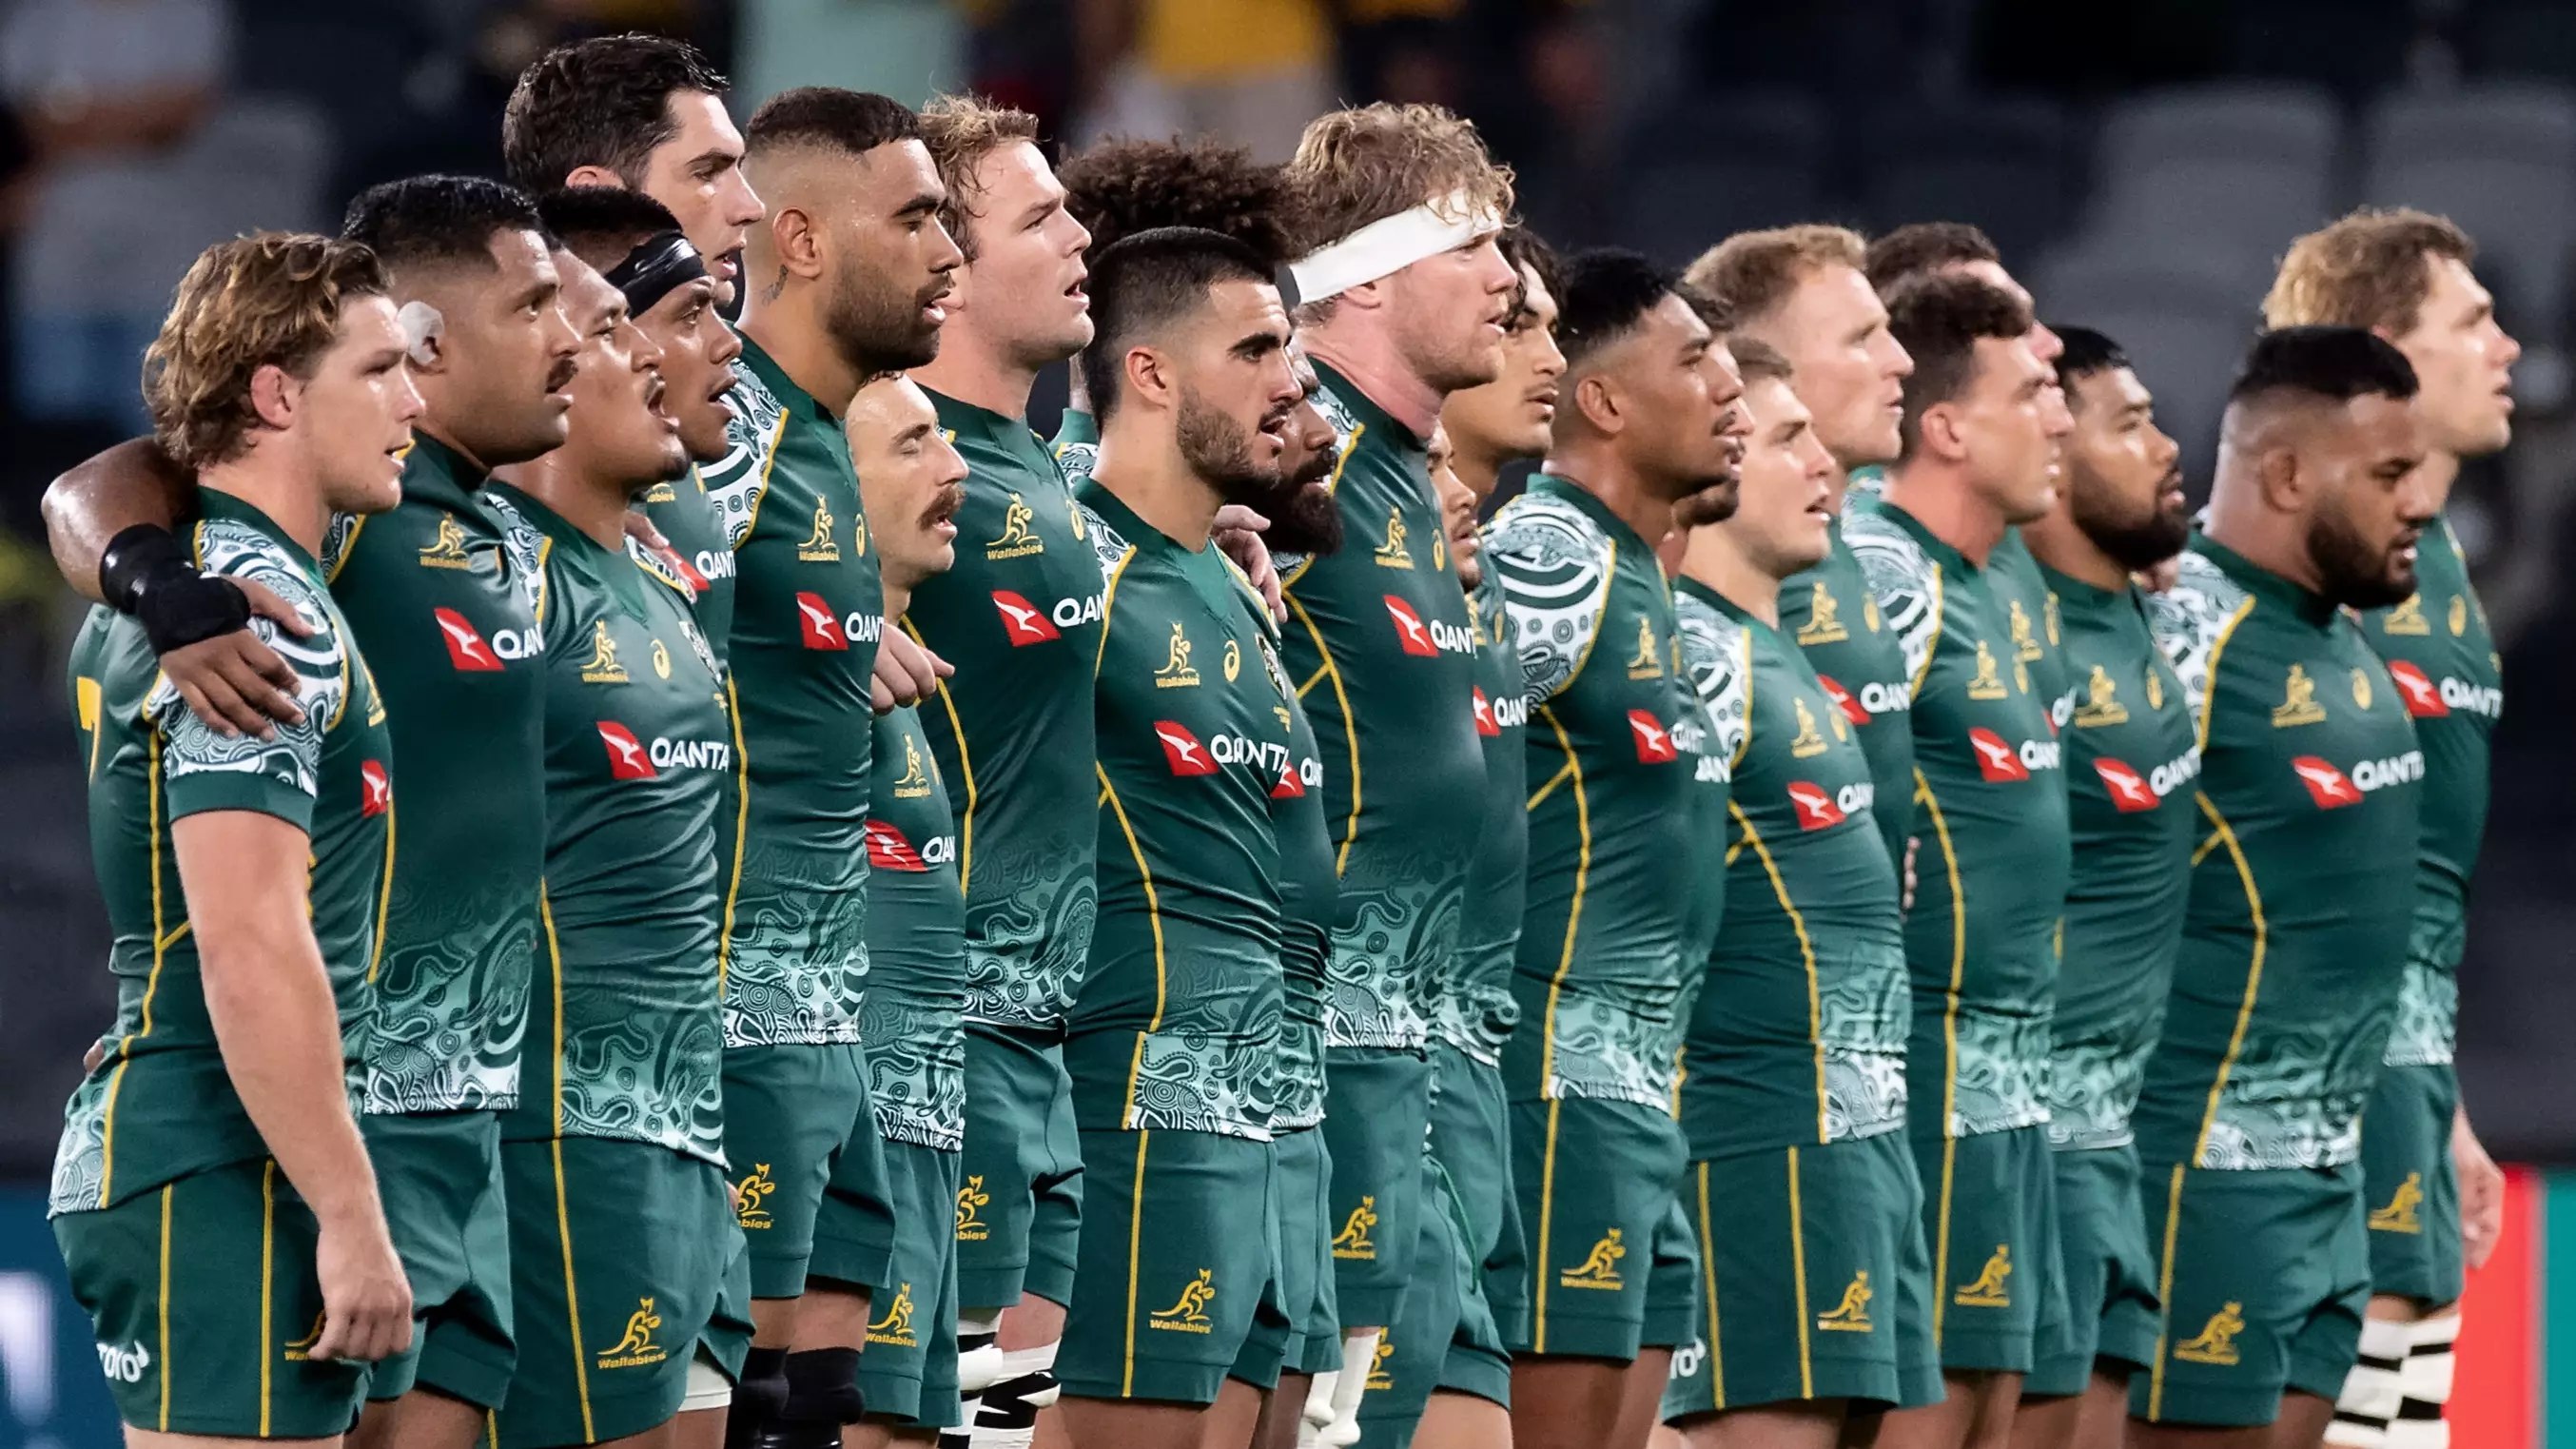 Debate Sparked About Whether Australia Should Make Dual National Anthem Permanent